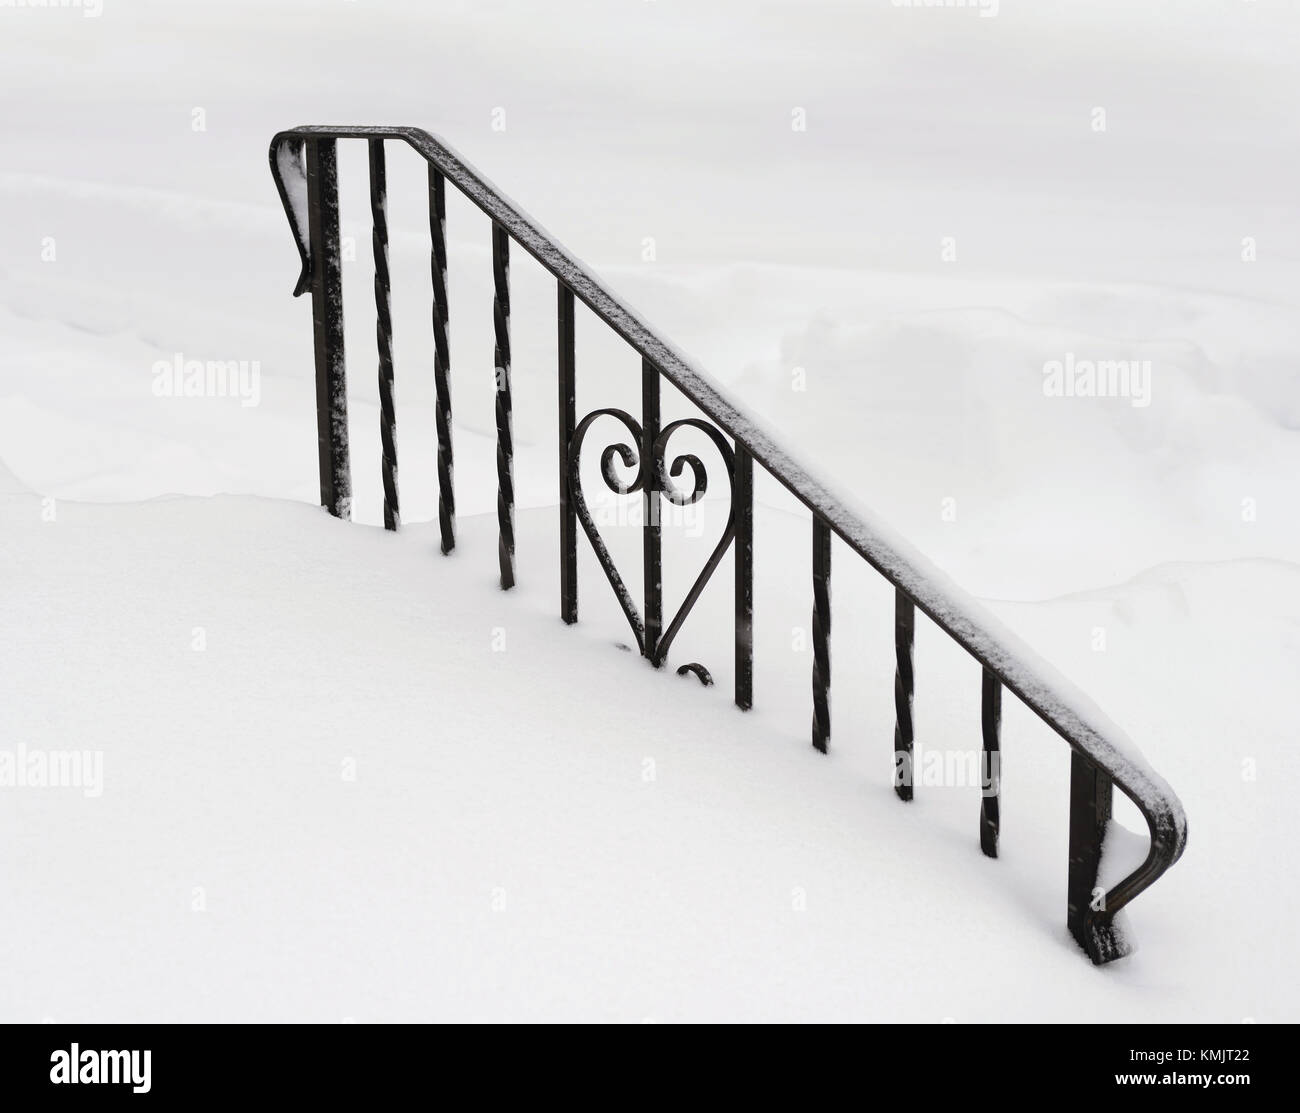 Wrought iron railing covered in snow. Winter background Stock Photo